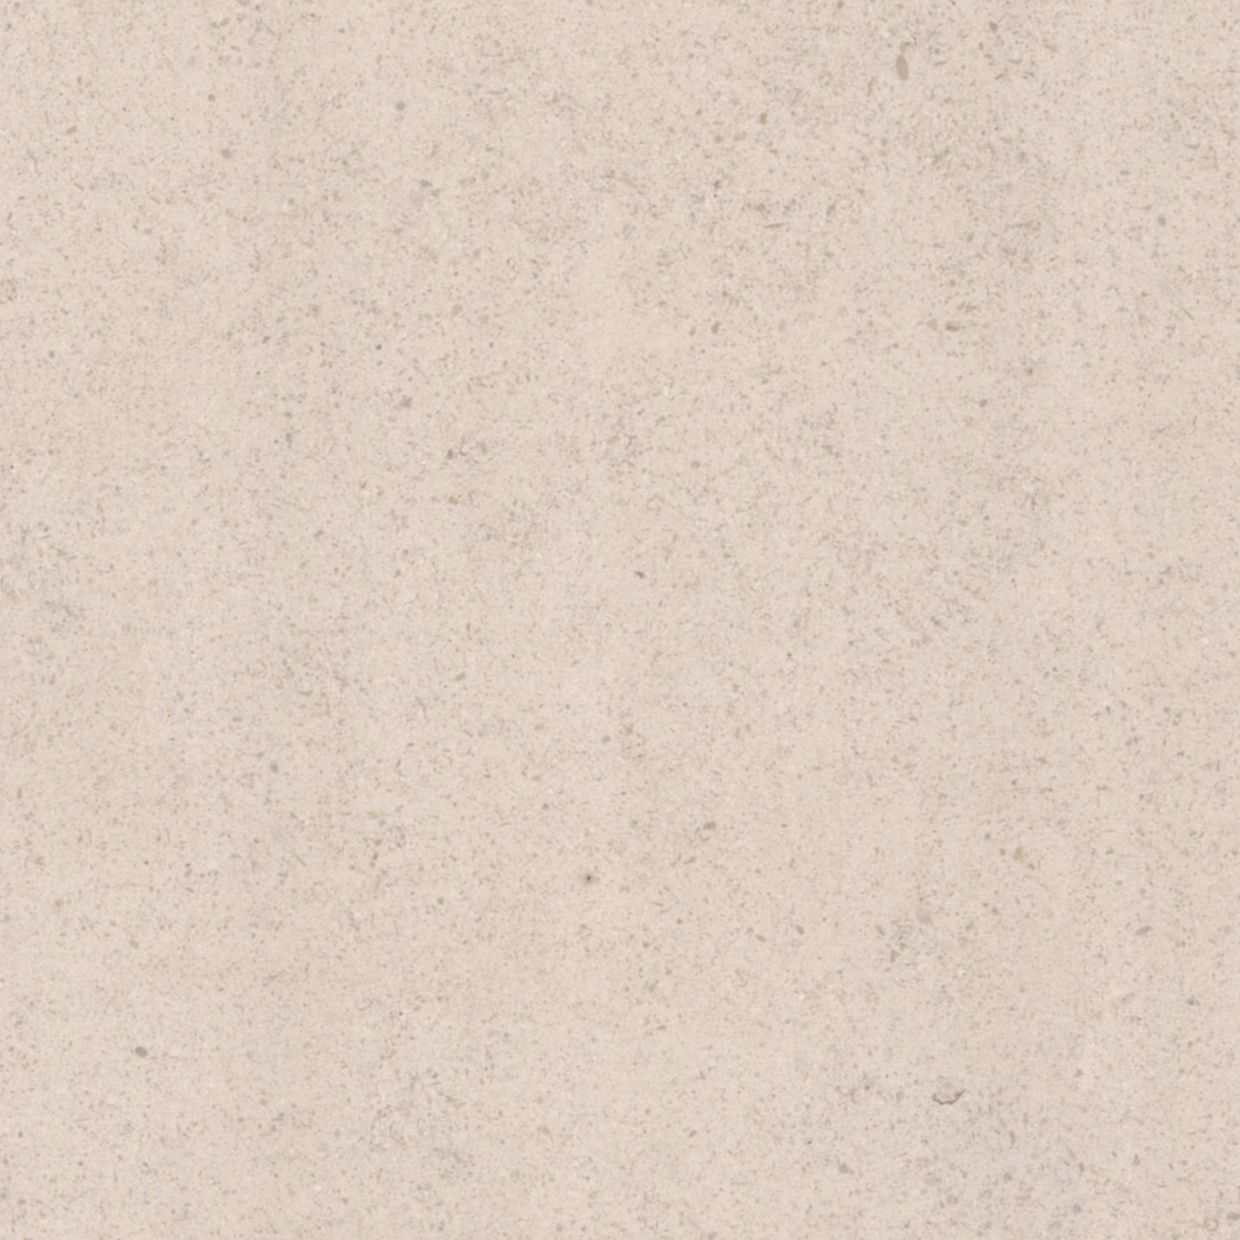 The NMN Moleanos is a beige colored limestone. It´s a very hard stone